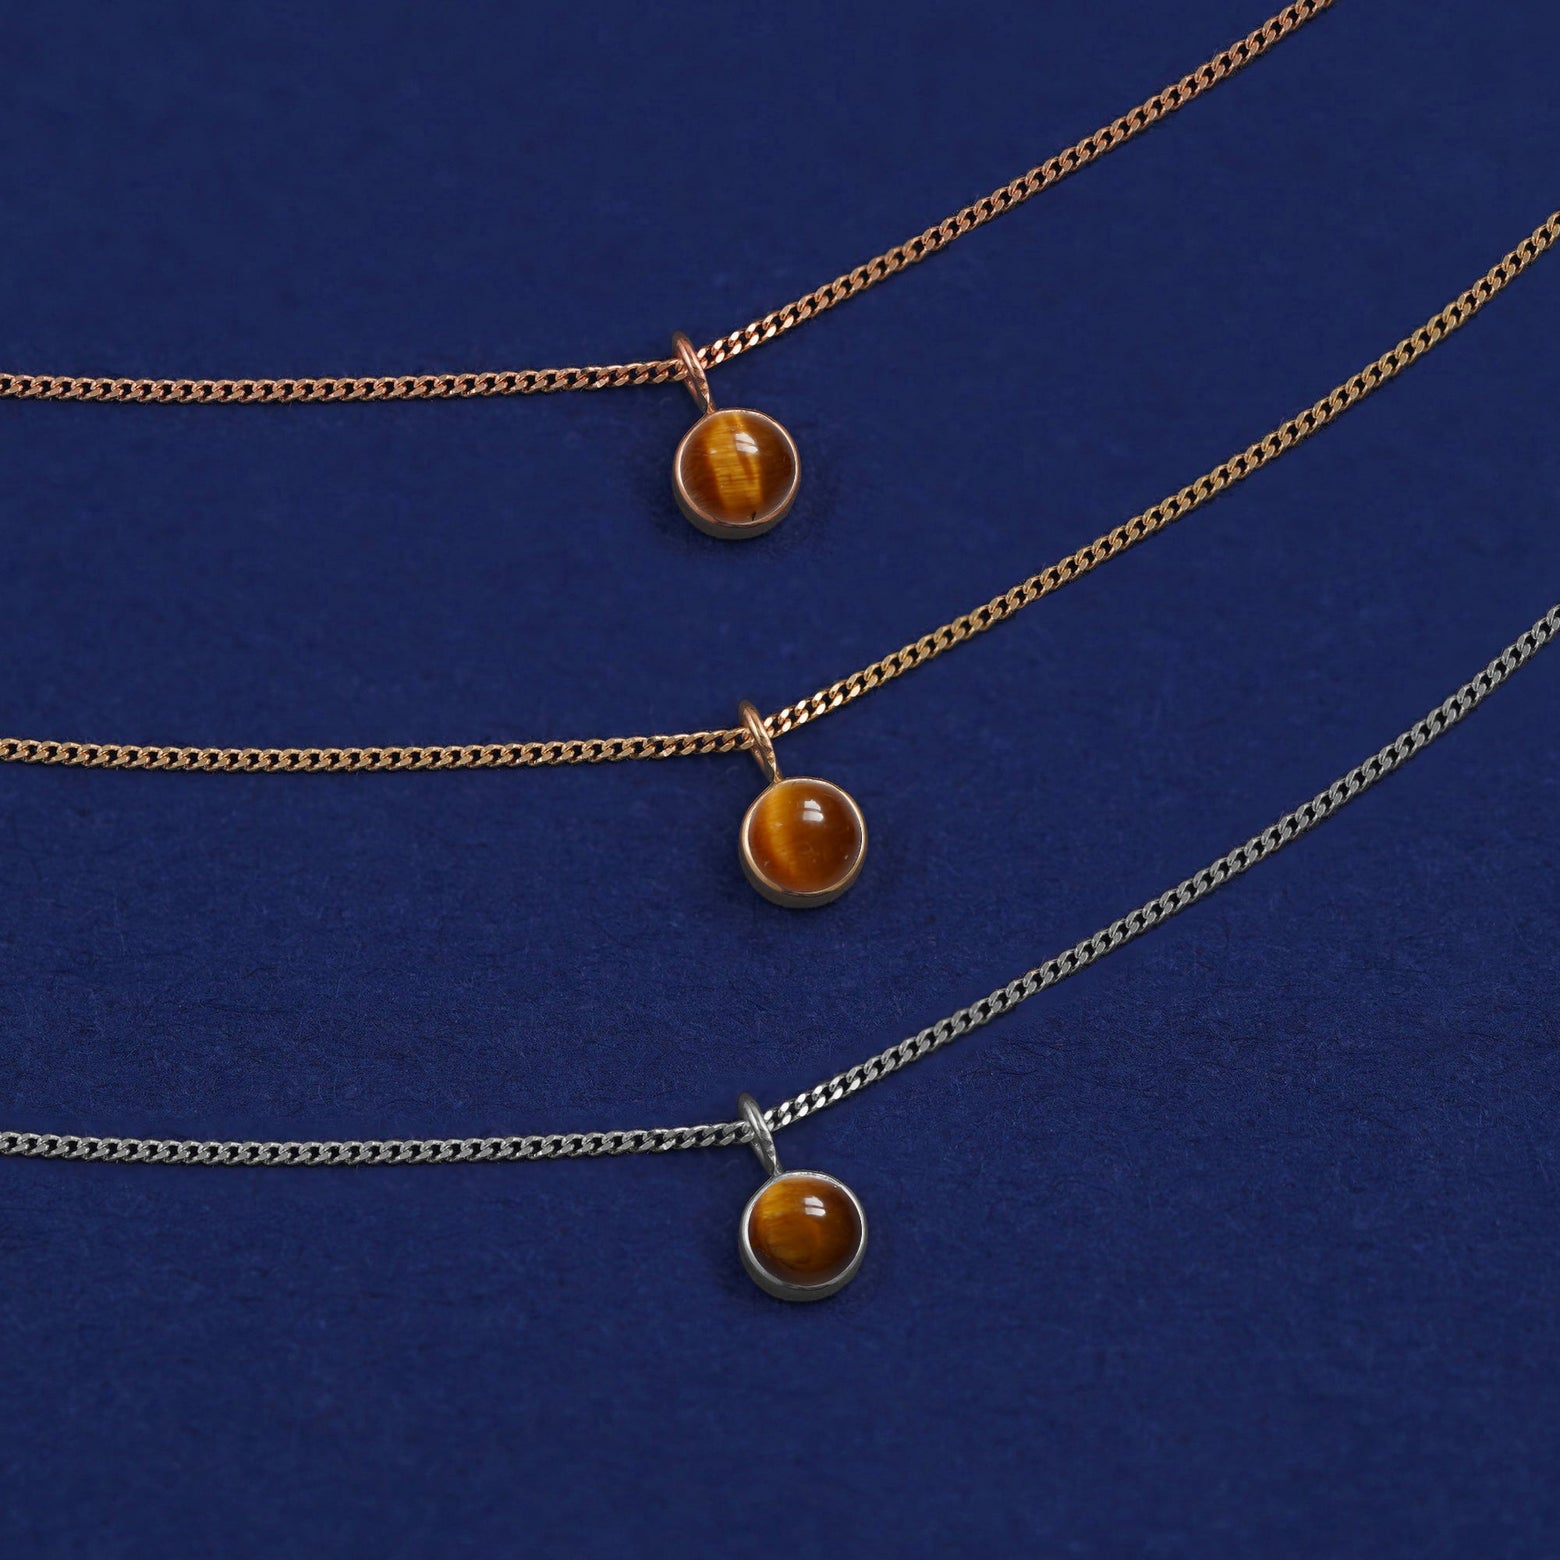 Three versions of the Tiger Eye Necklace in options of yellow, white, and rose gold on a dark blue background